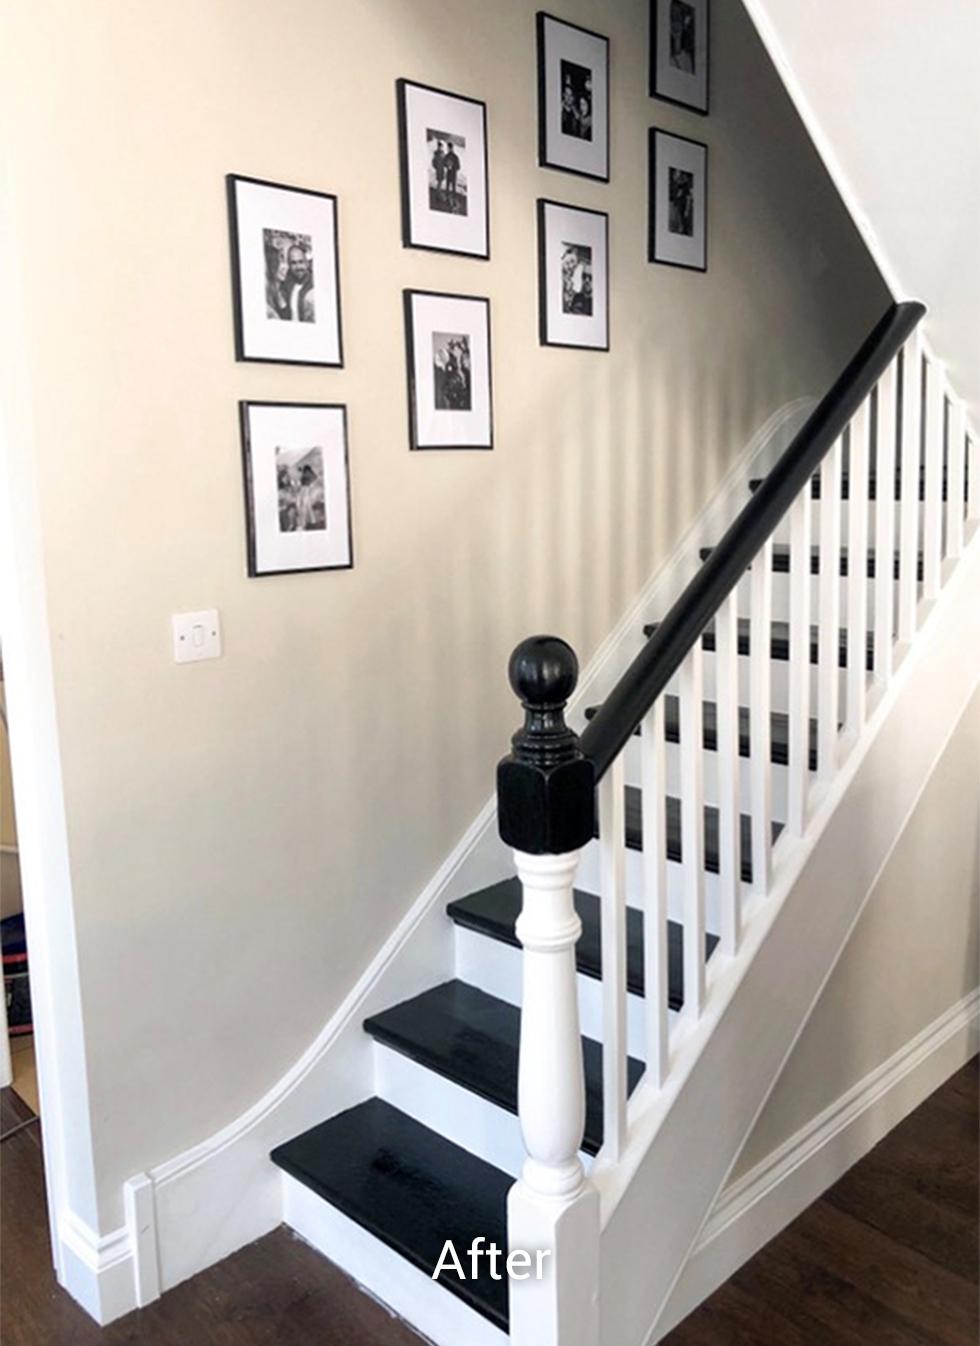 After staircase transformation